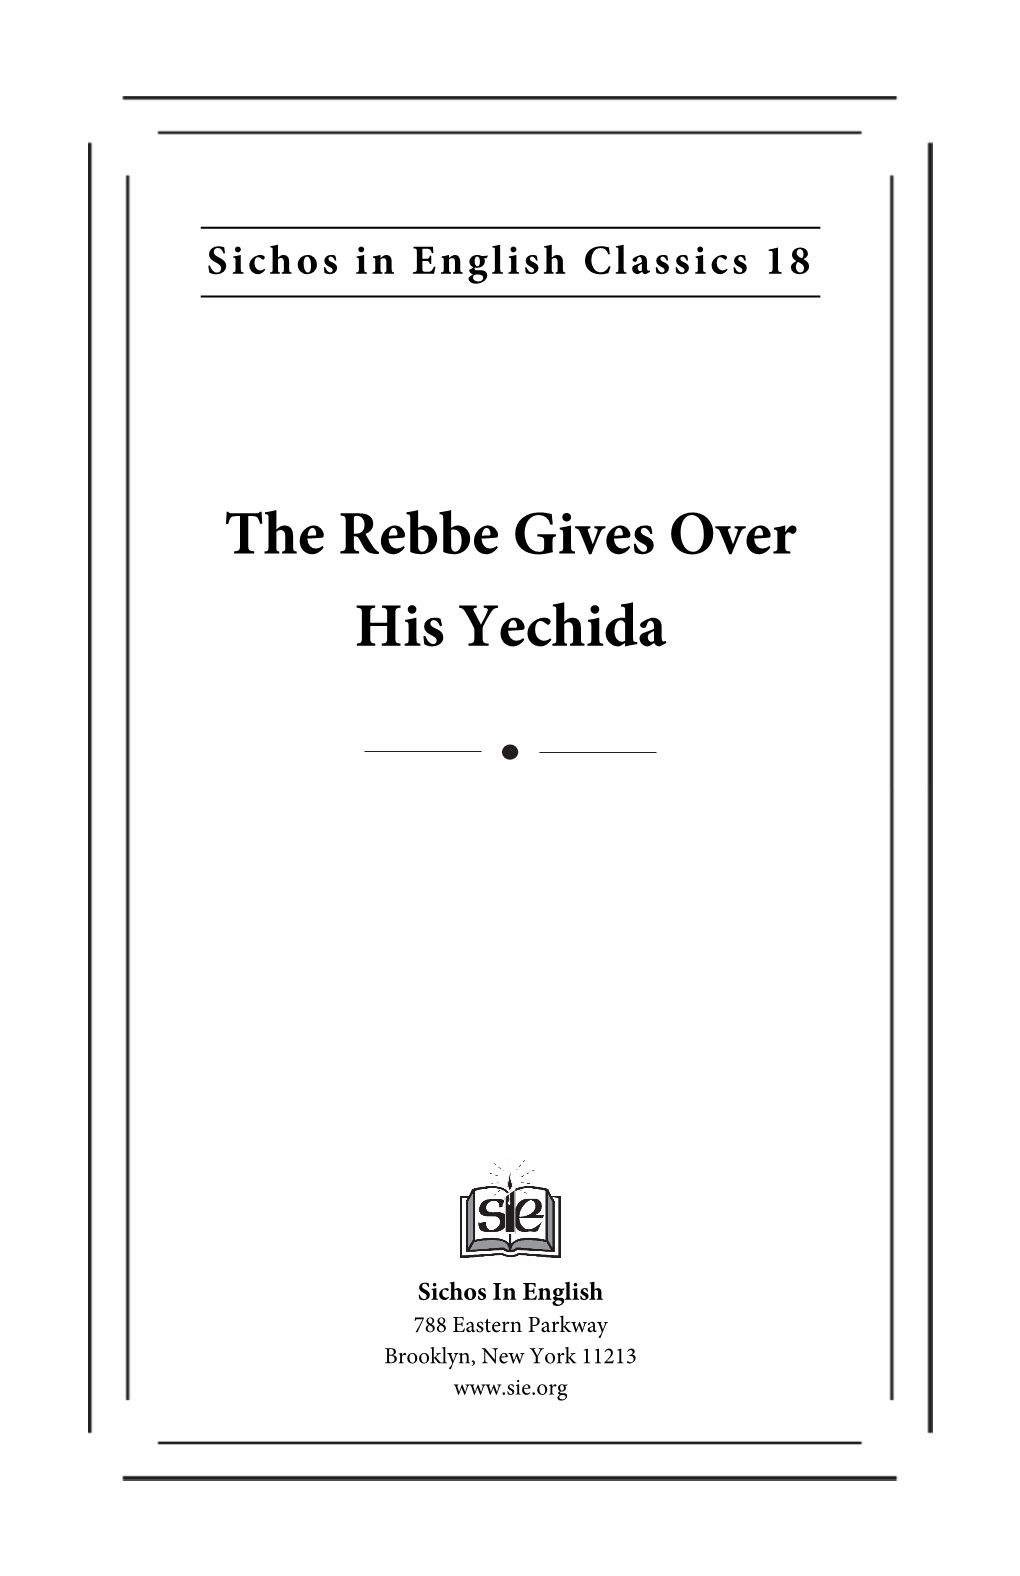 The Rebbe Gives Over His Yechida